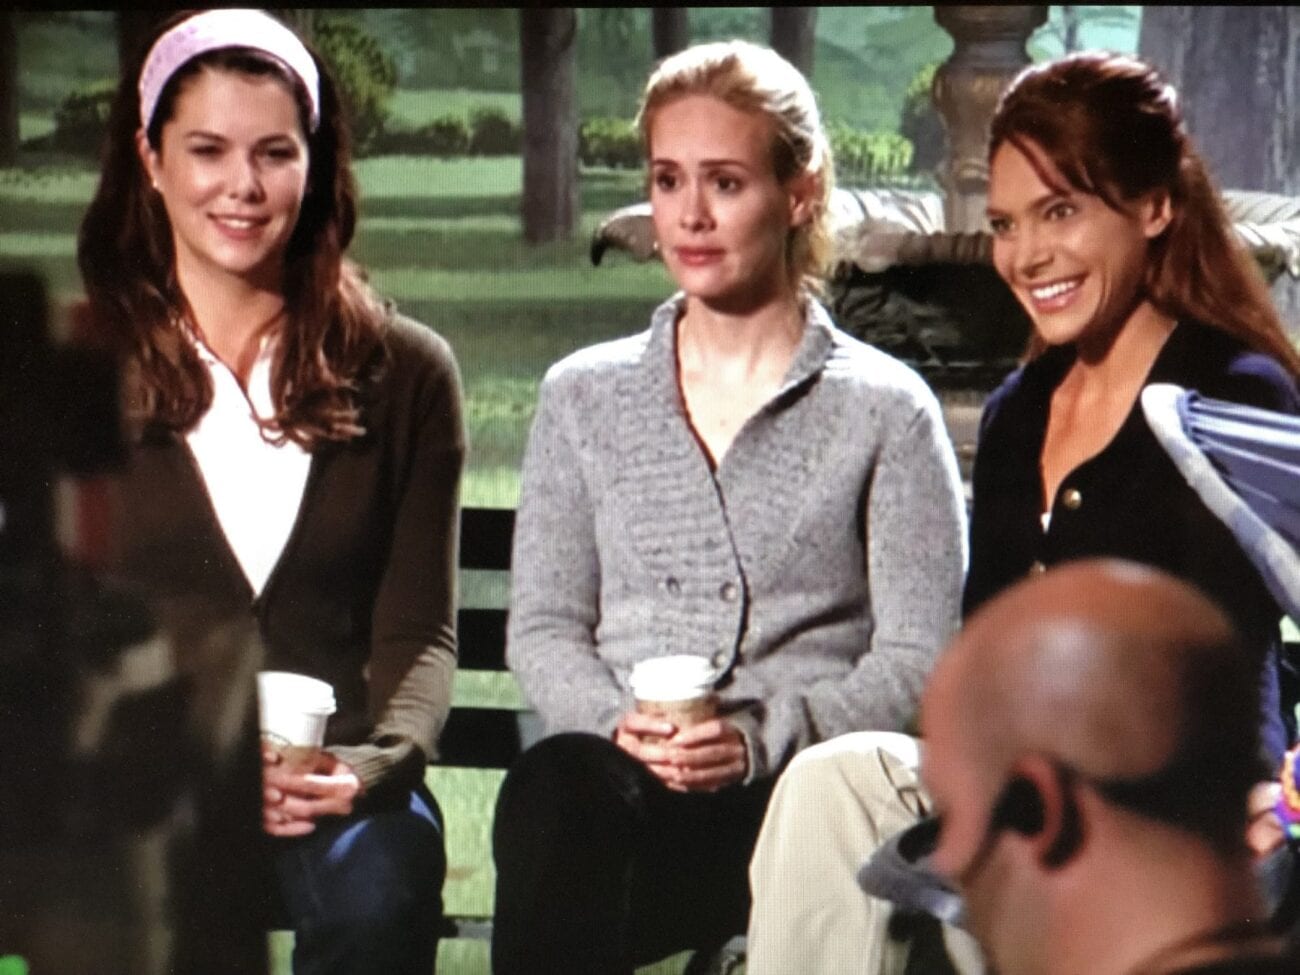 Lauren Graham, Harriet, and Jeannie sit on a park bench, during a sketch